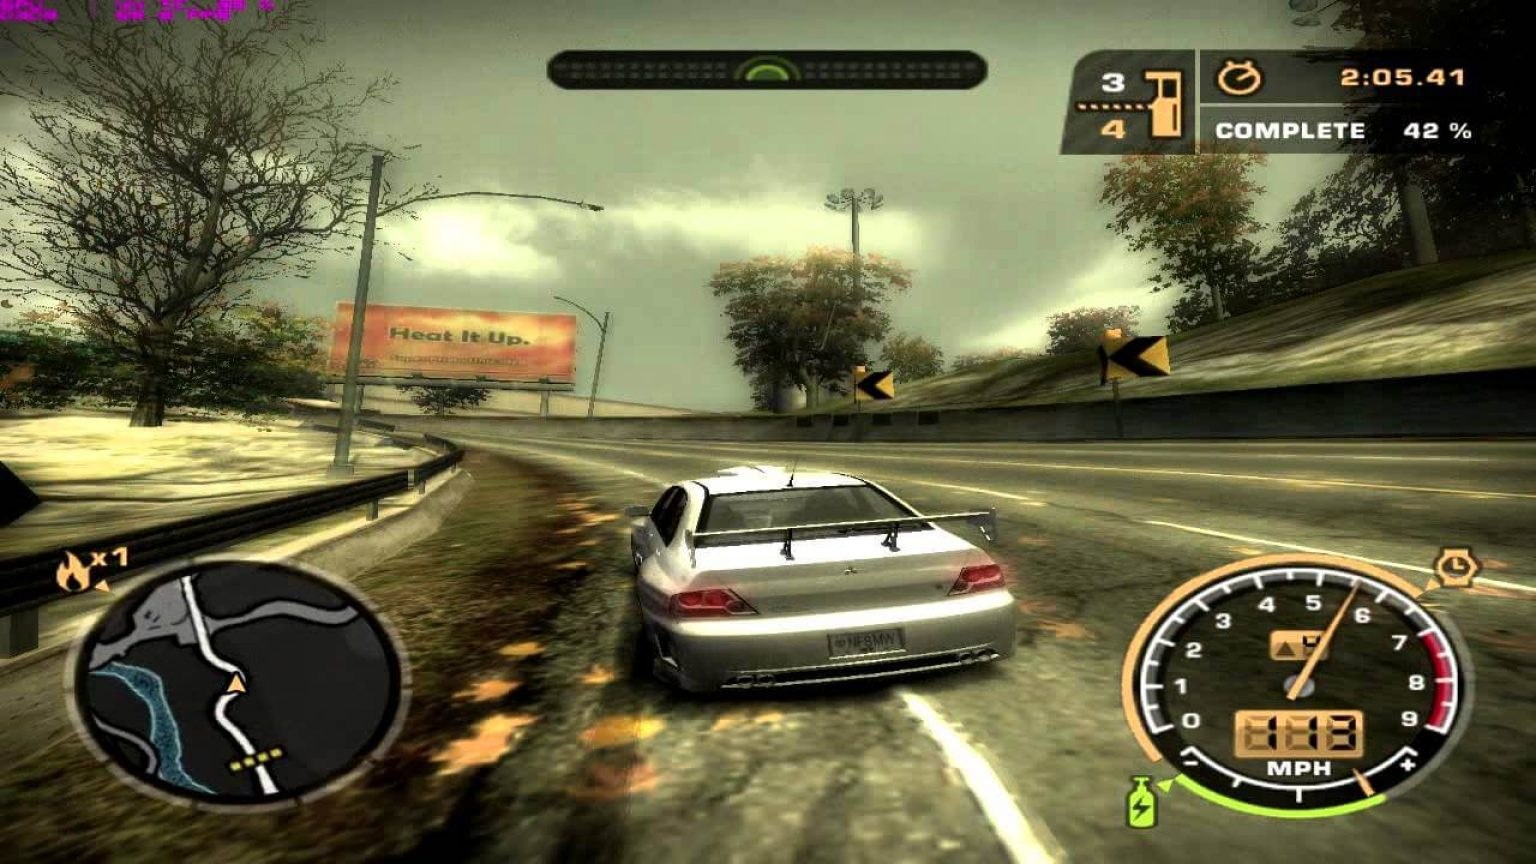 Нед фор спид мост вондет. NFS - most wanted 2005 (PC). Need for Speed mostwanted 2005. NFS most wanted 2005 Black Edition. NFS Underground most wanted 2005.